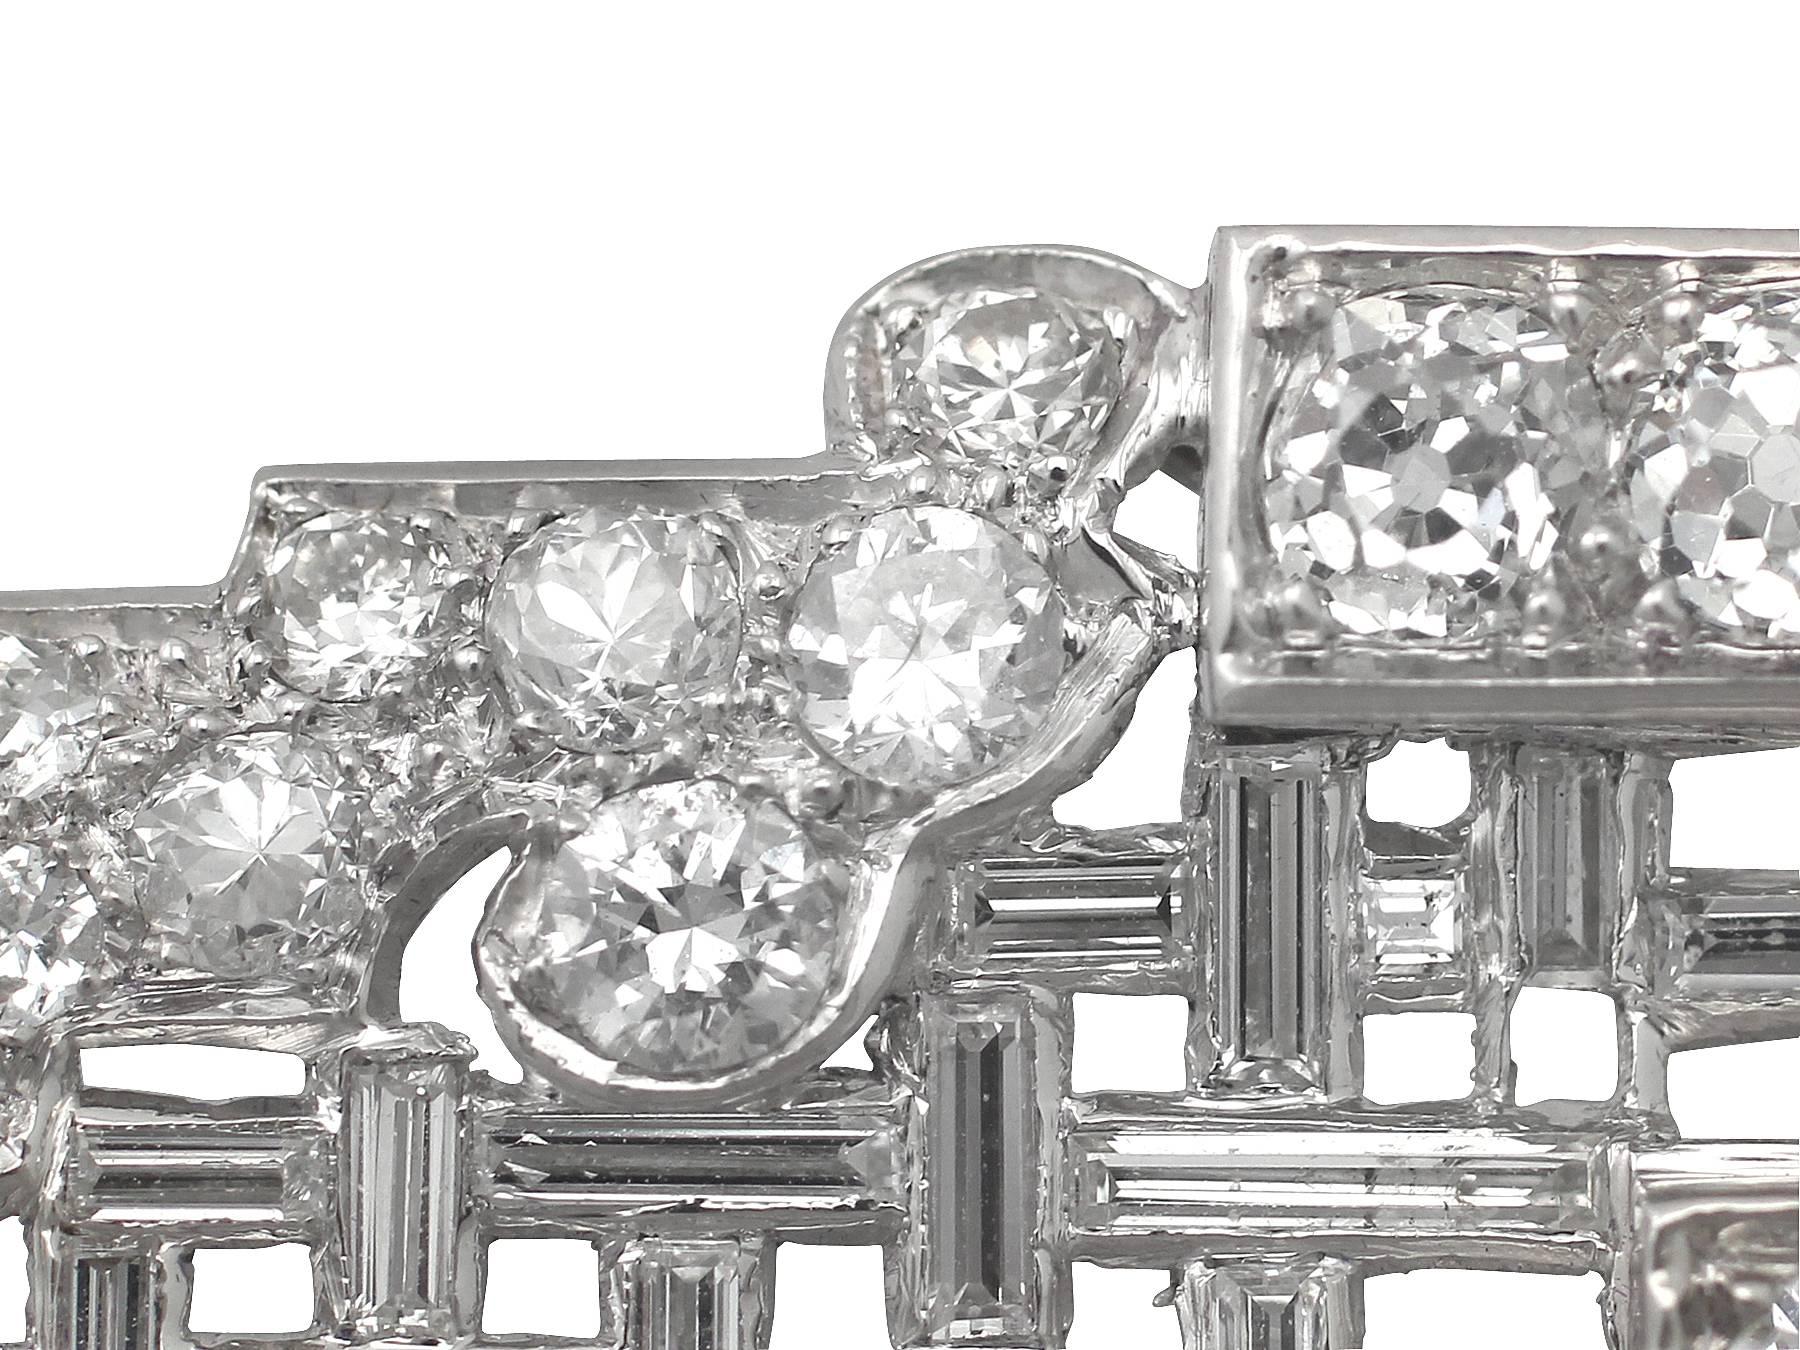 A stunning, fine and impressive antique 5.83 carat diamond Art Deco brooch in platinum; part of our antique jewelry and estate jewelry collections

This stunning example of an authentic Art Deco diamond brooch has been crafted in platinum.

The